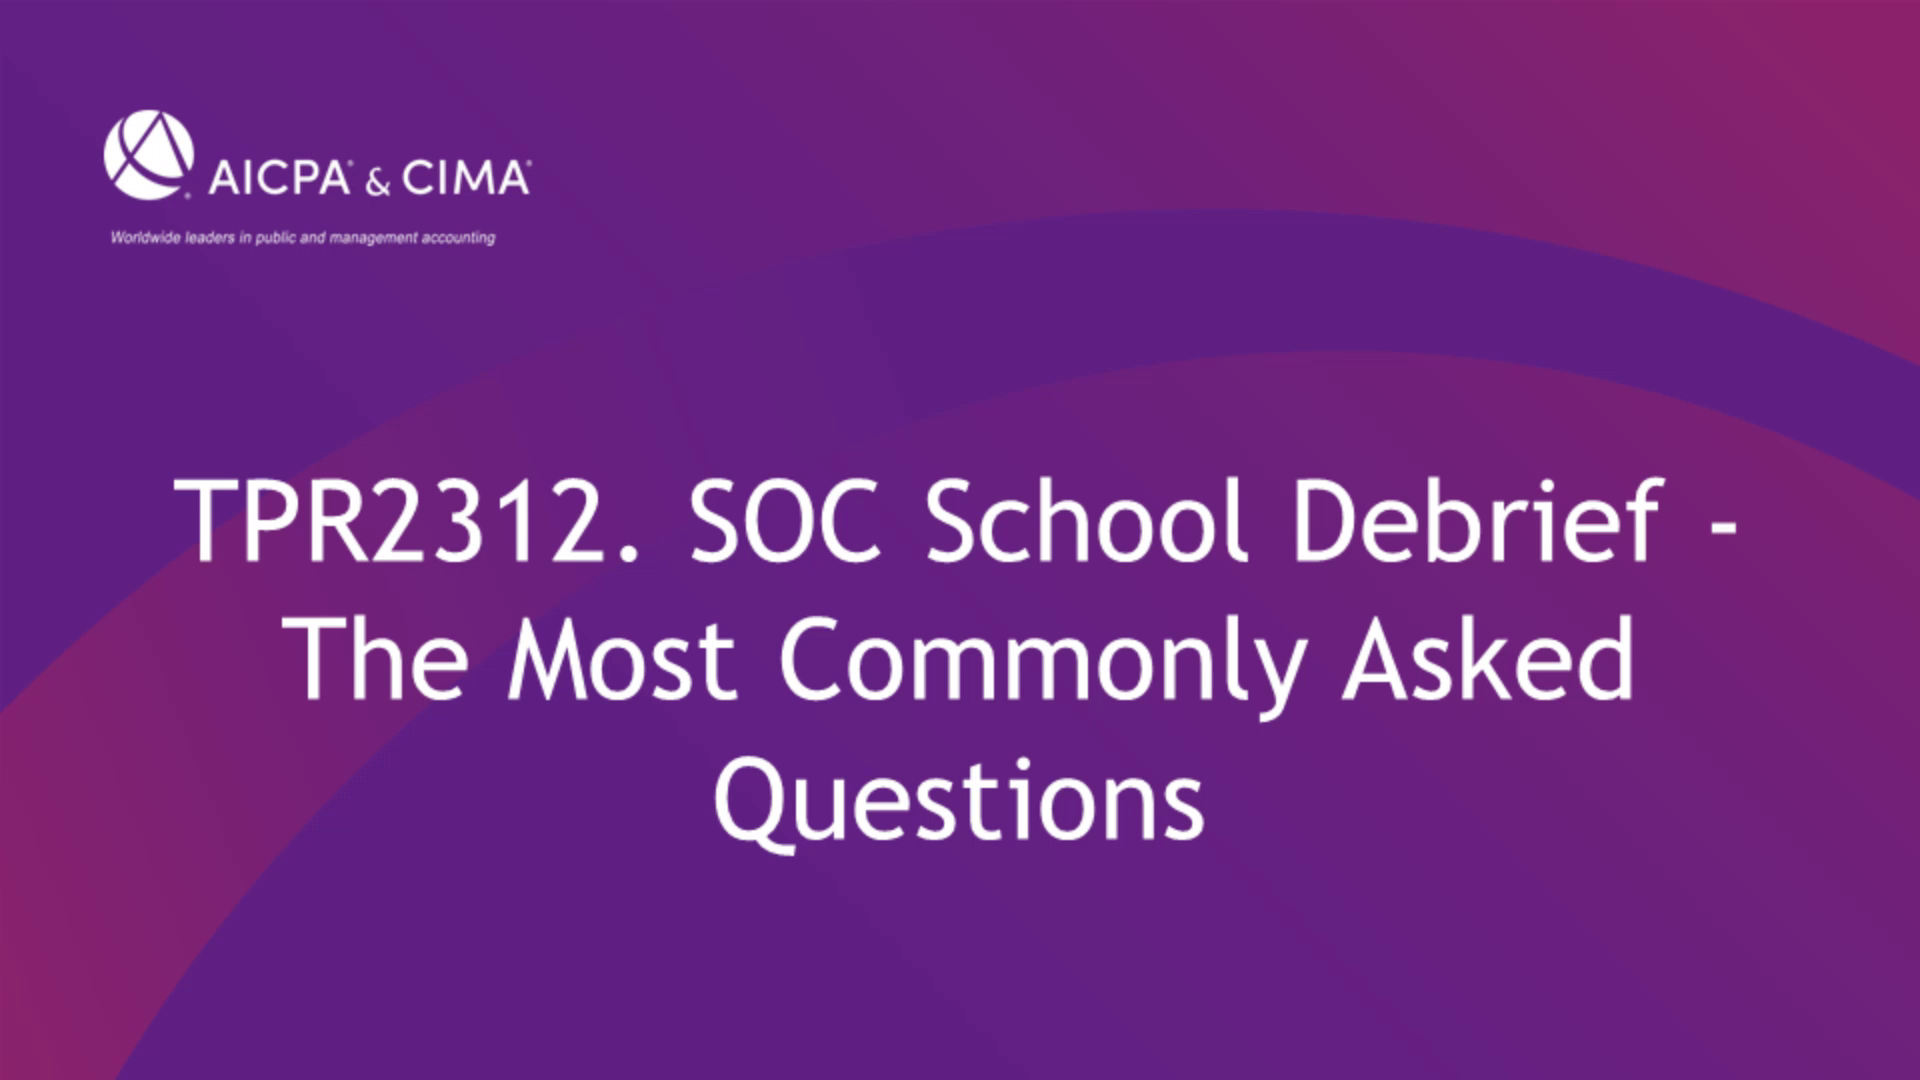 SOC School Debrief - The Most Commonly Asked Questions